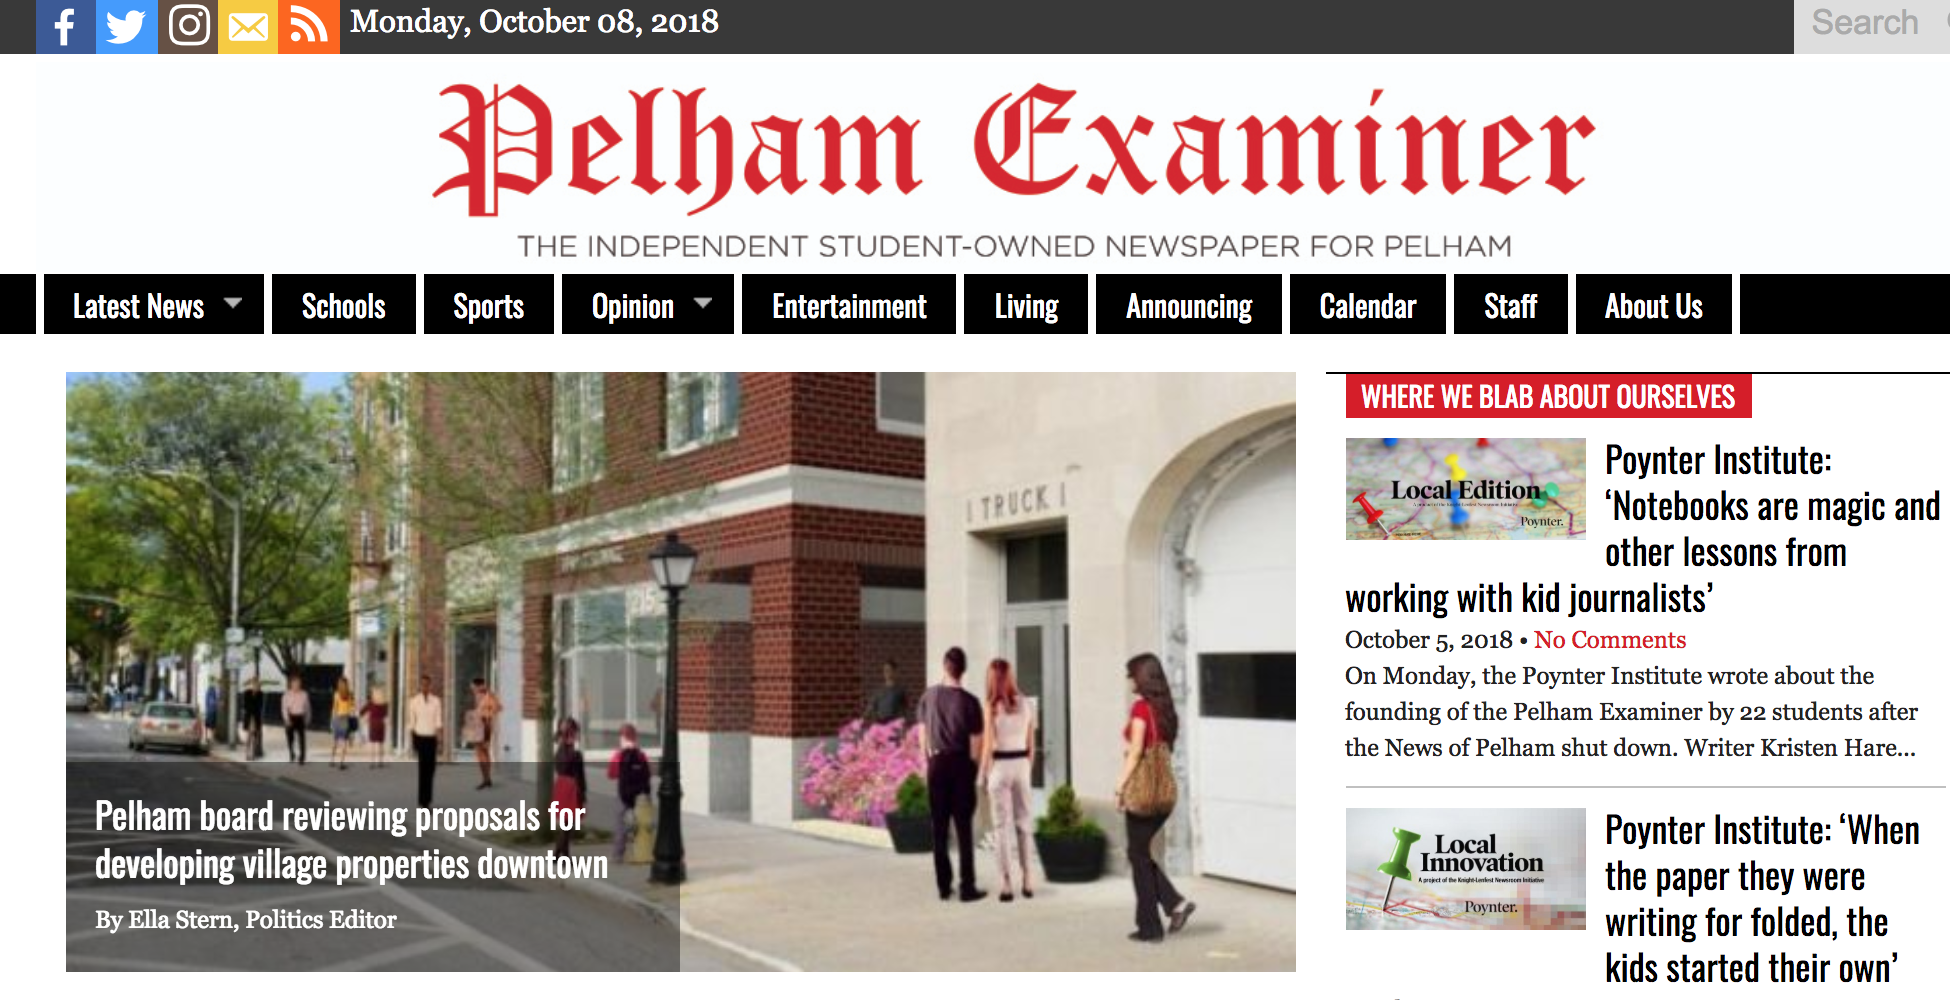 How the Student-Owned Pelham Examiner Uses WordPress to Empower Young Journalists